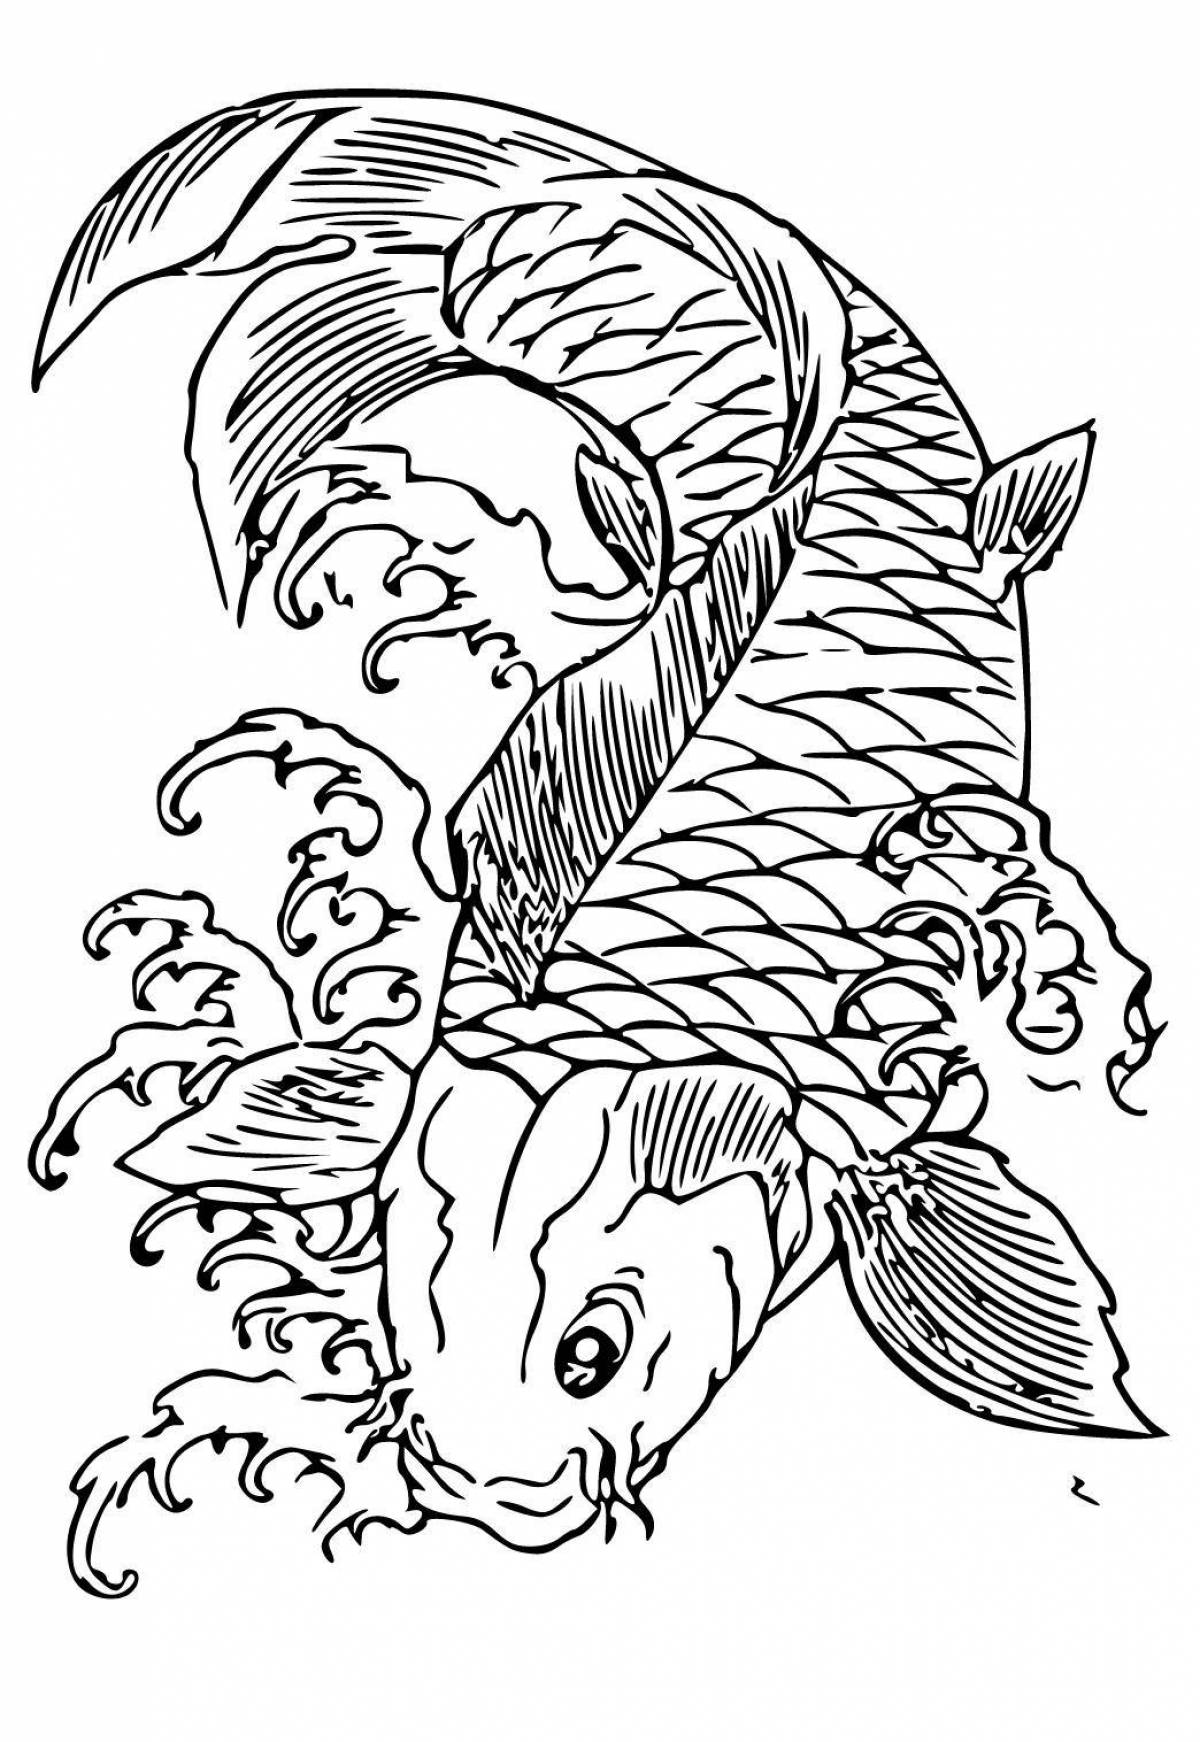 Coloring page amazing parrotfish